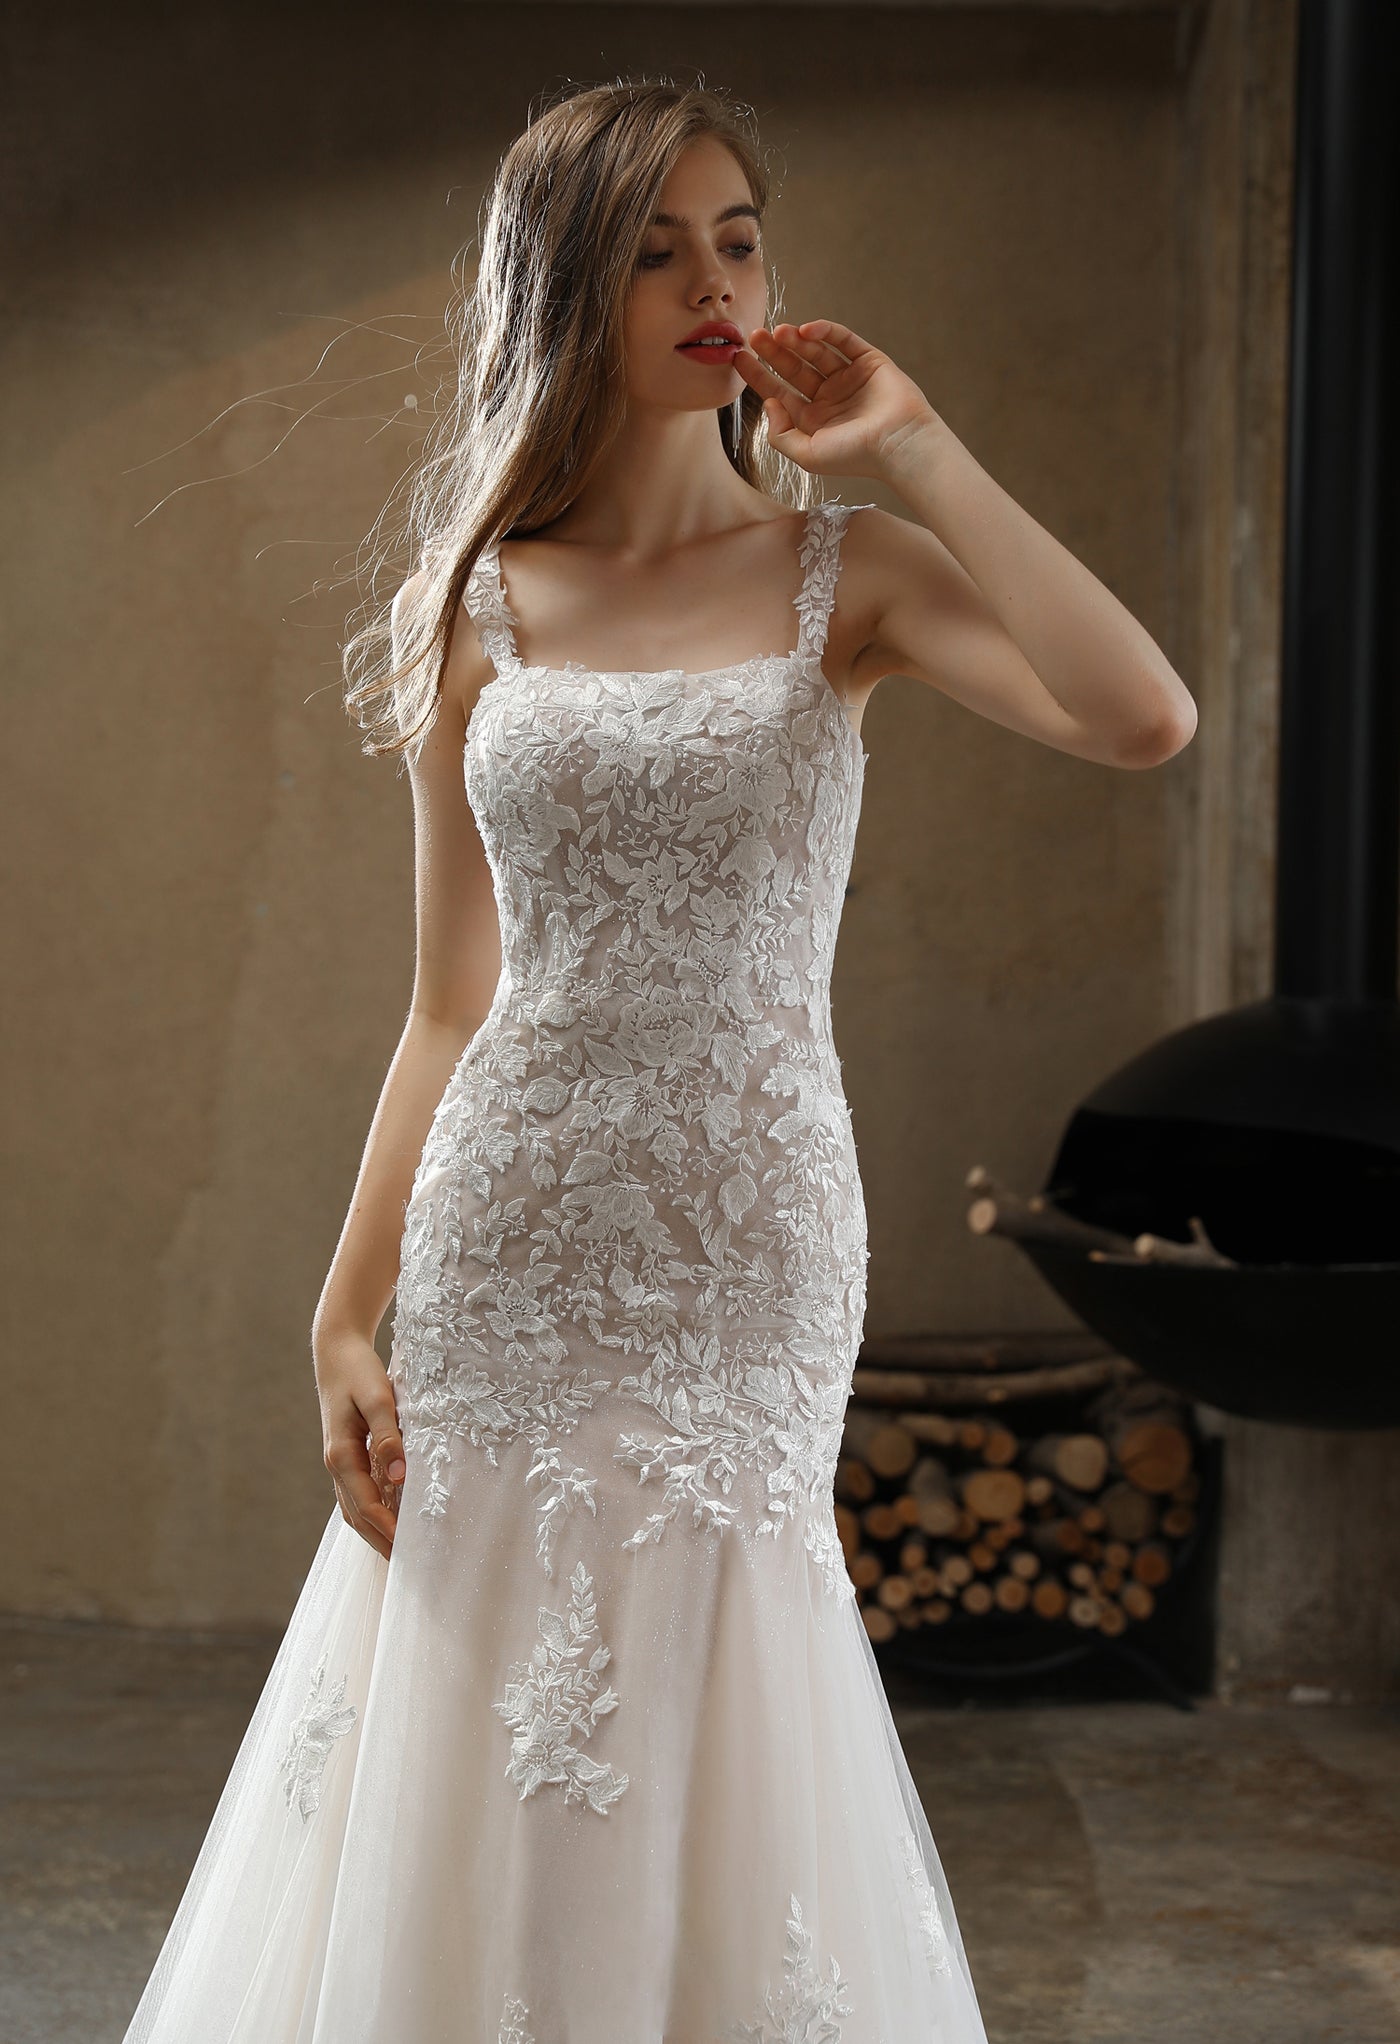 A bride in a Square Neckline with Lace Straps Mermaid Wedding Gown by Bergamot Bridal poses thoughtfully.